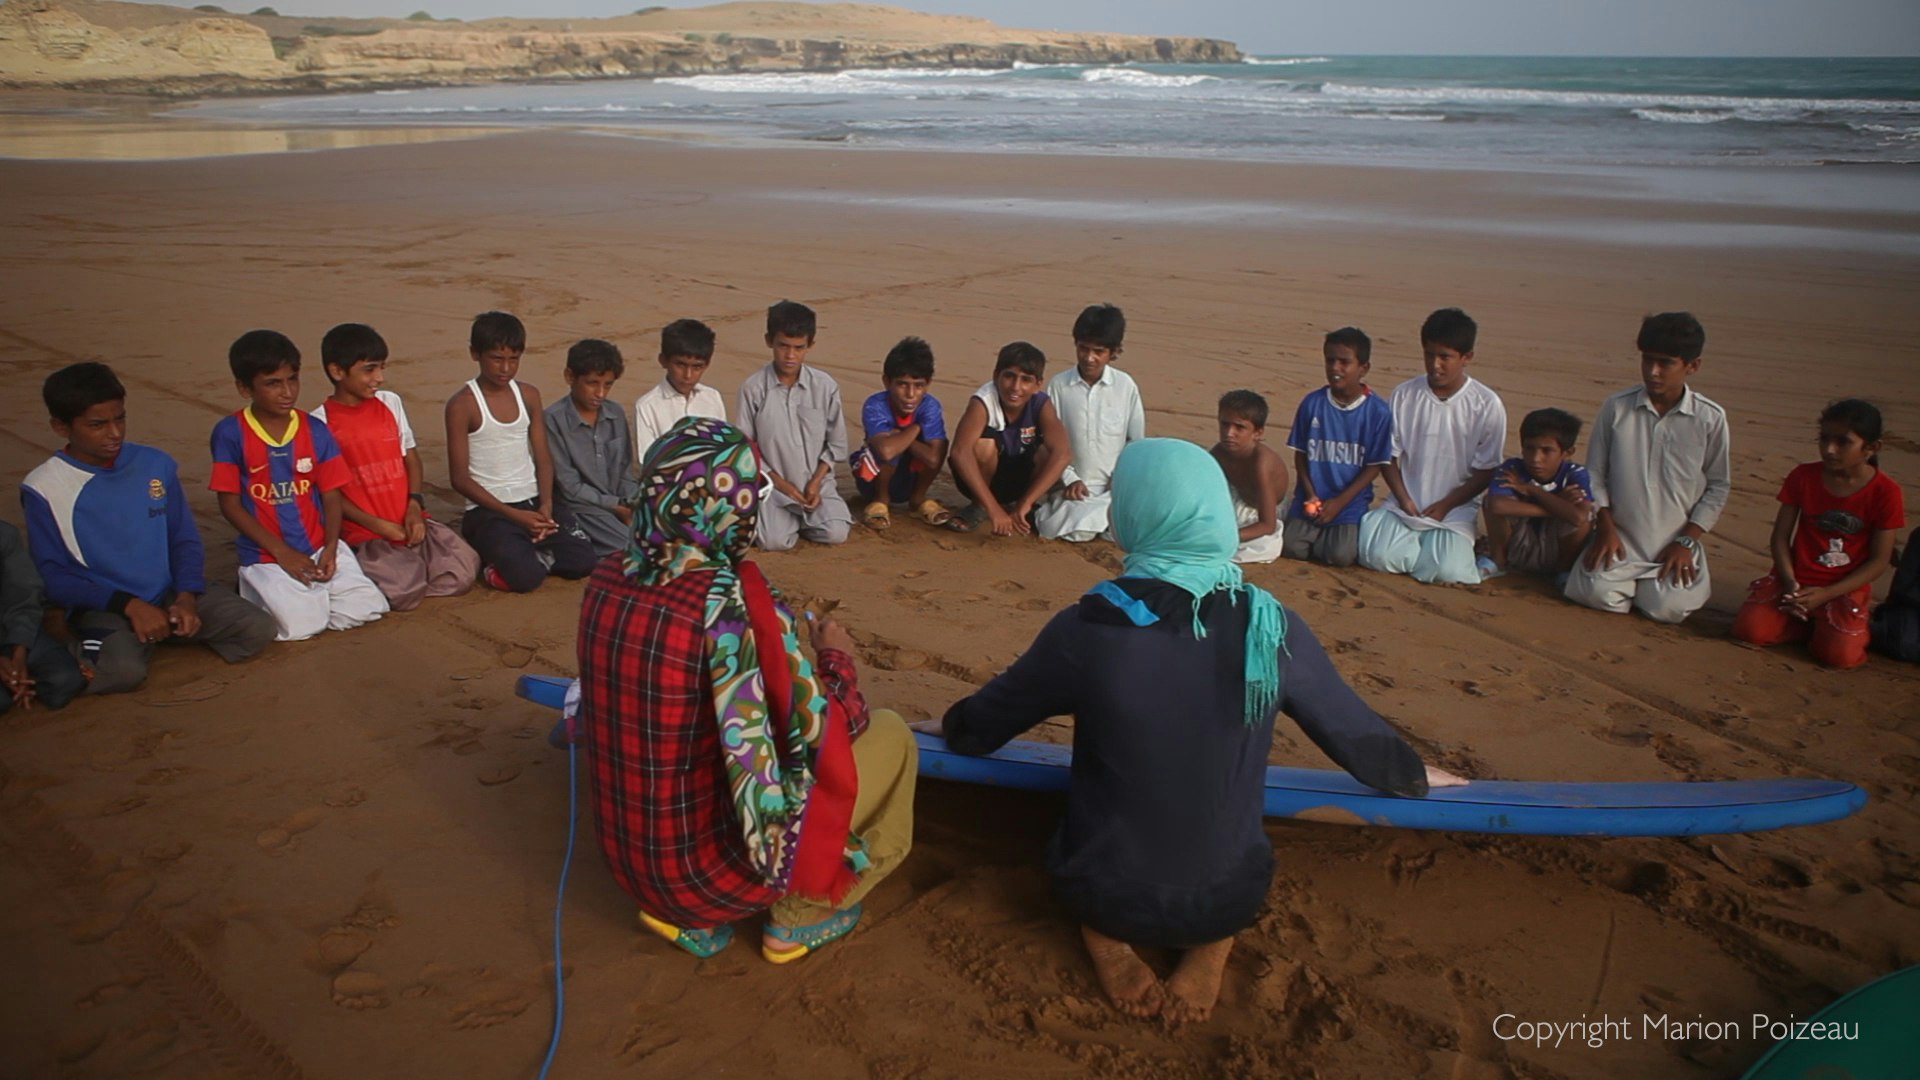 How can surfing help create real global change?